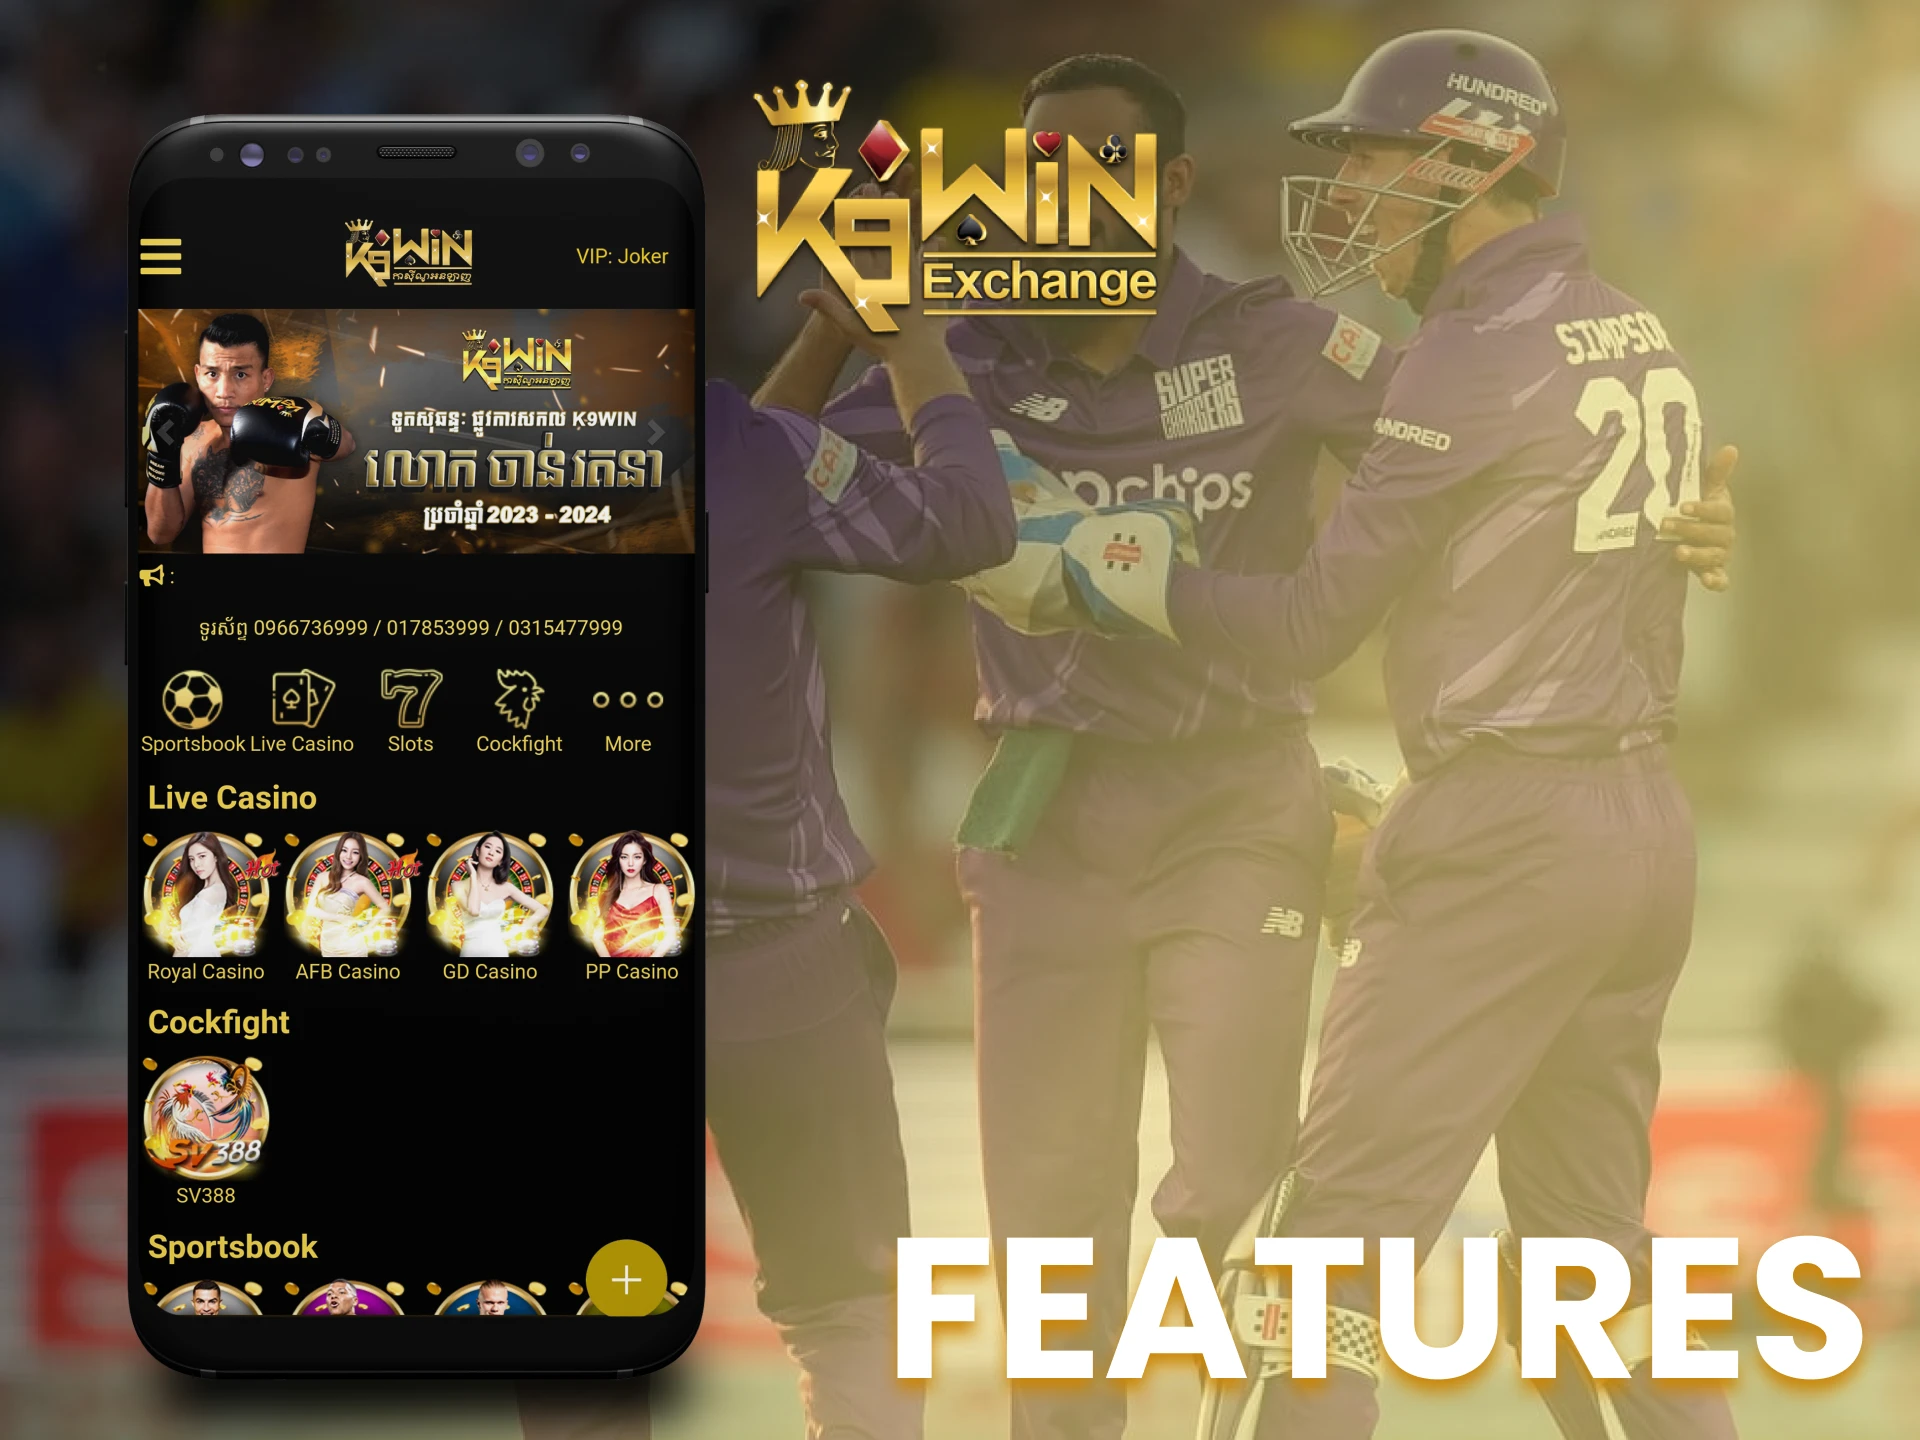 Learn more about the K9Win app features.